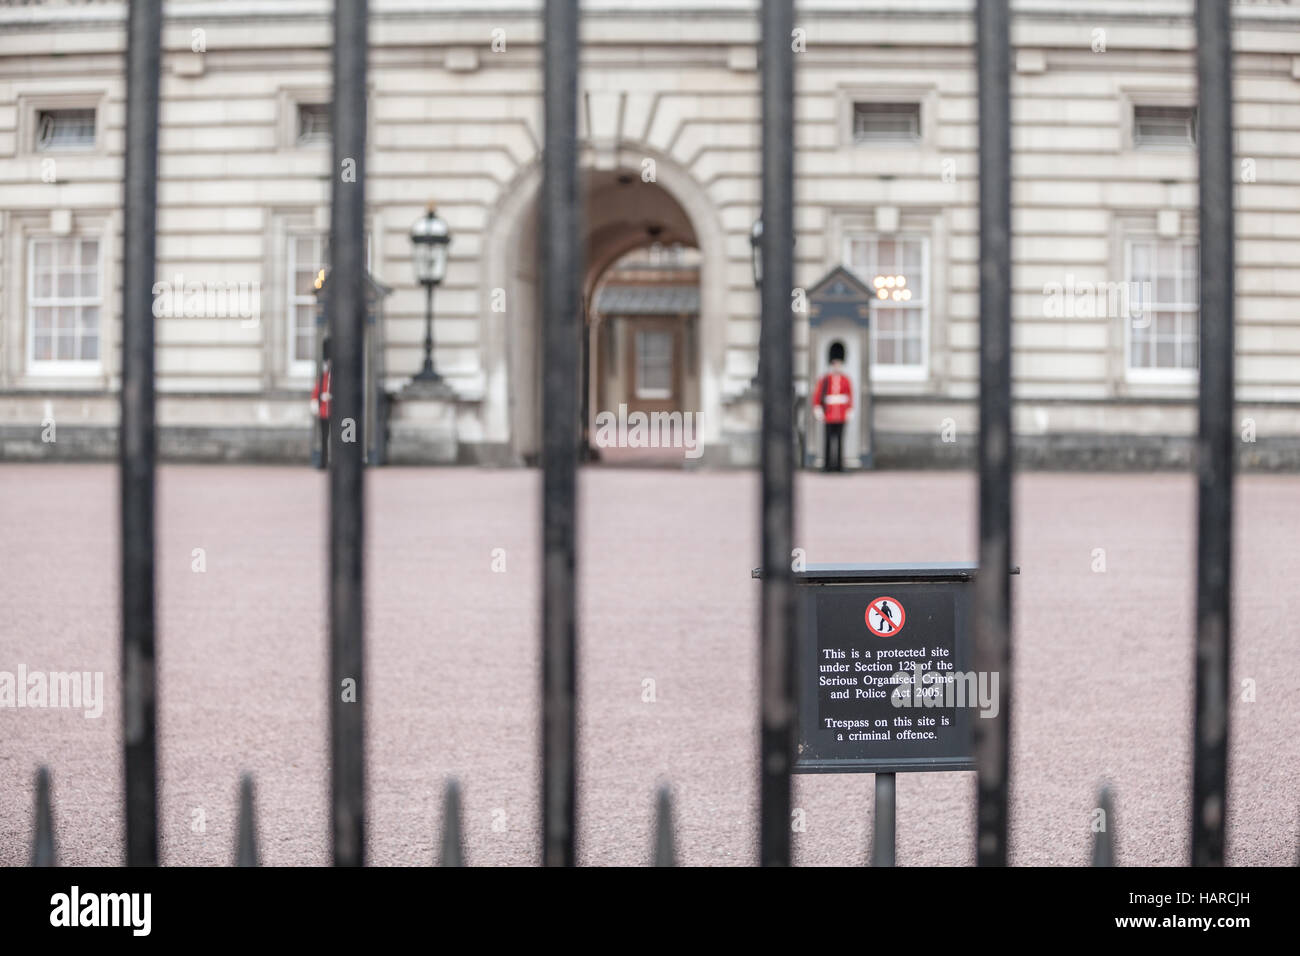 London info panel about illegal trespass. Queen's guards of Buckingham Palace view through the fence Stock Photo